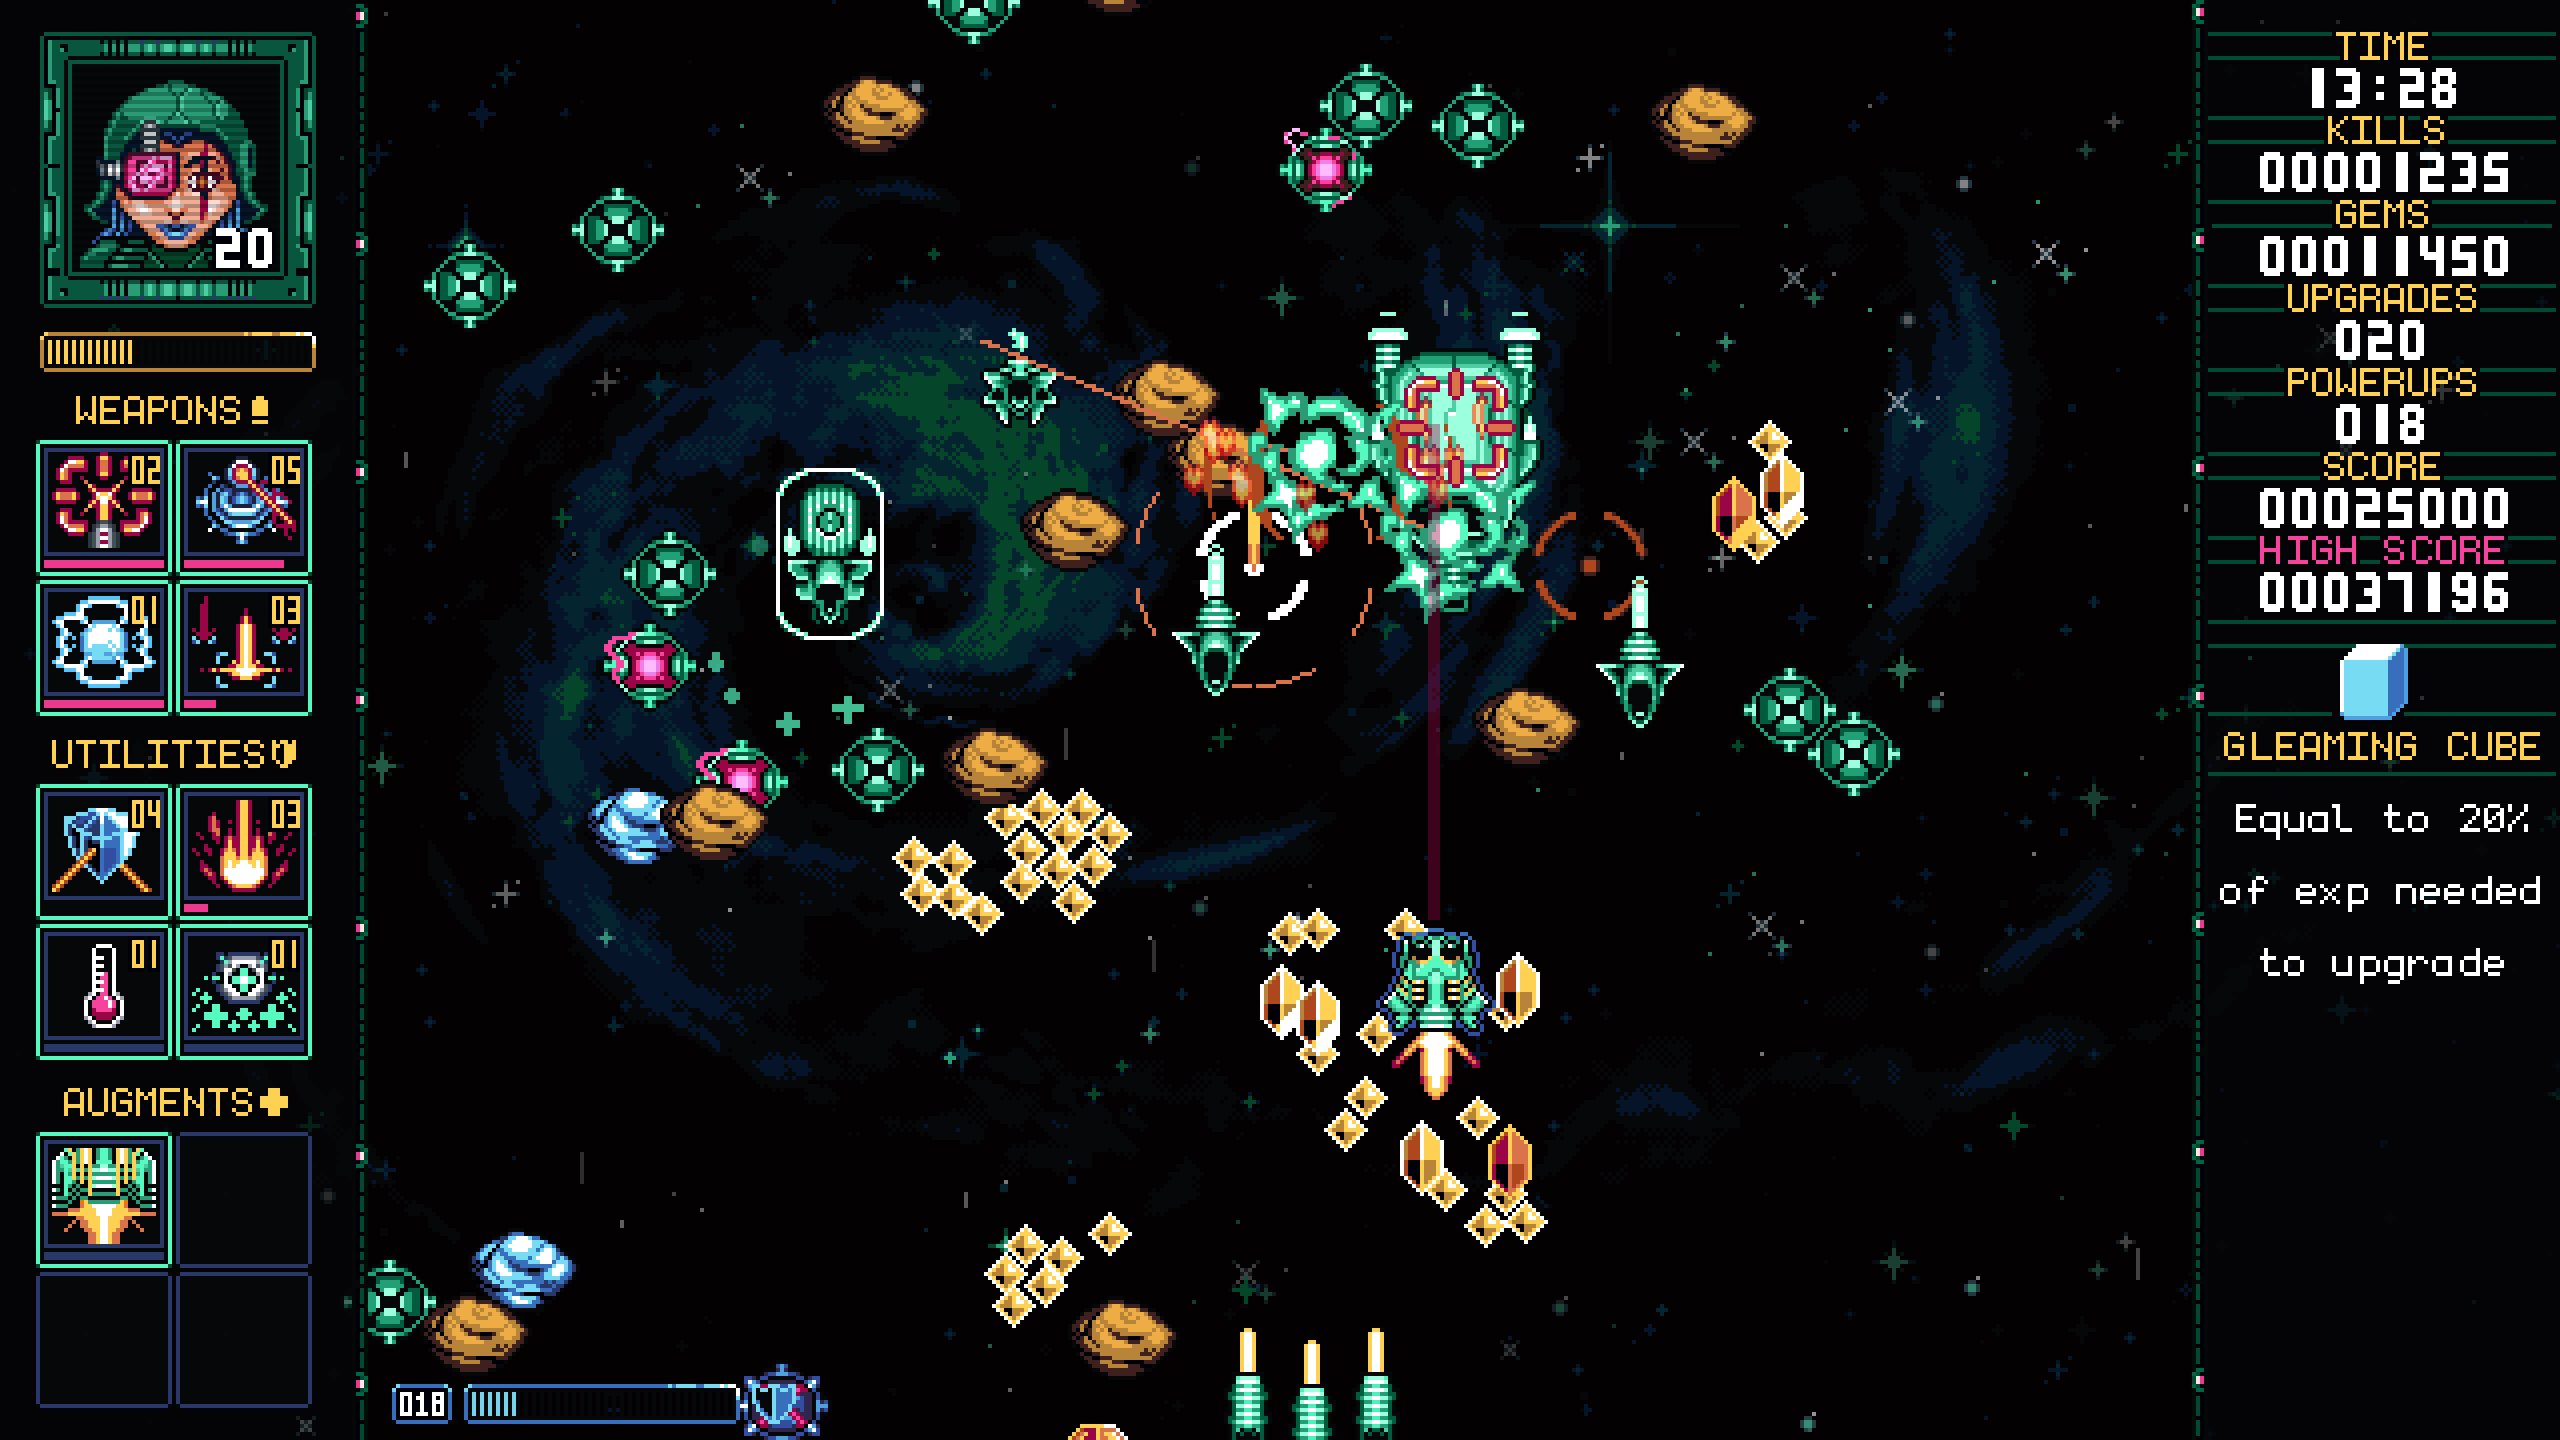 Spaceships, lasers, explosions, and gems in a Gunlocked screenshot.